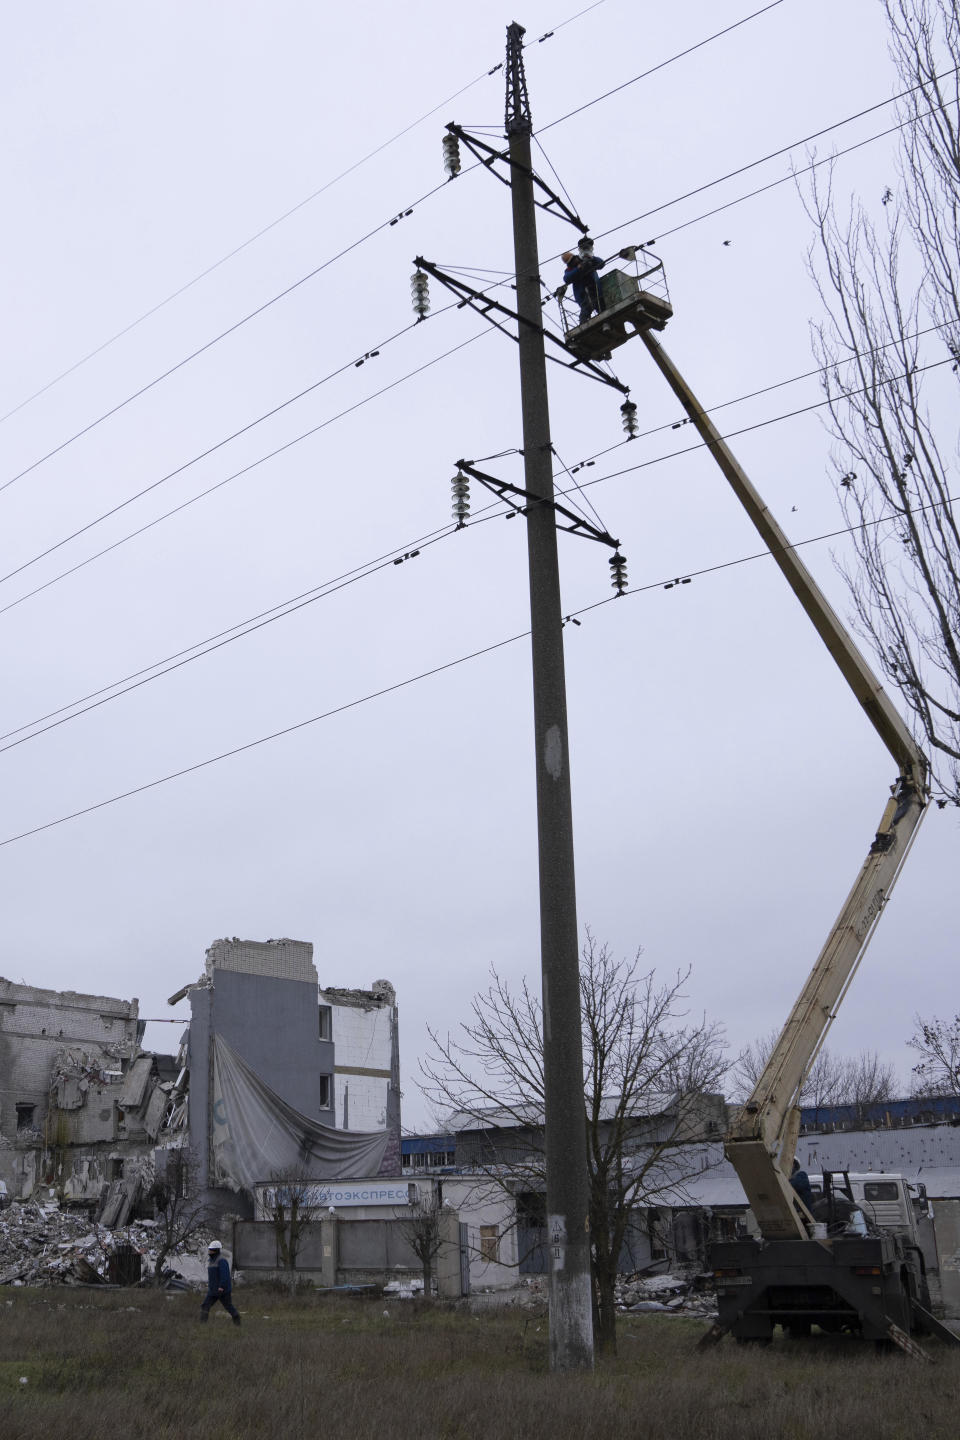 Workers repair electricity cables damaged during shelling by Russian forces in Kherson, Ukraine, December 3, 2022. / Credit: Evgeniy Maloletka/AP